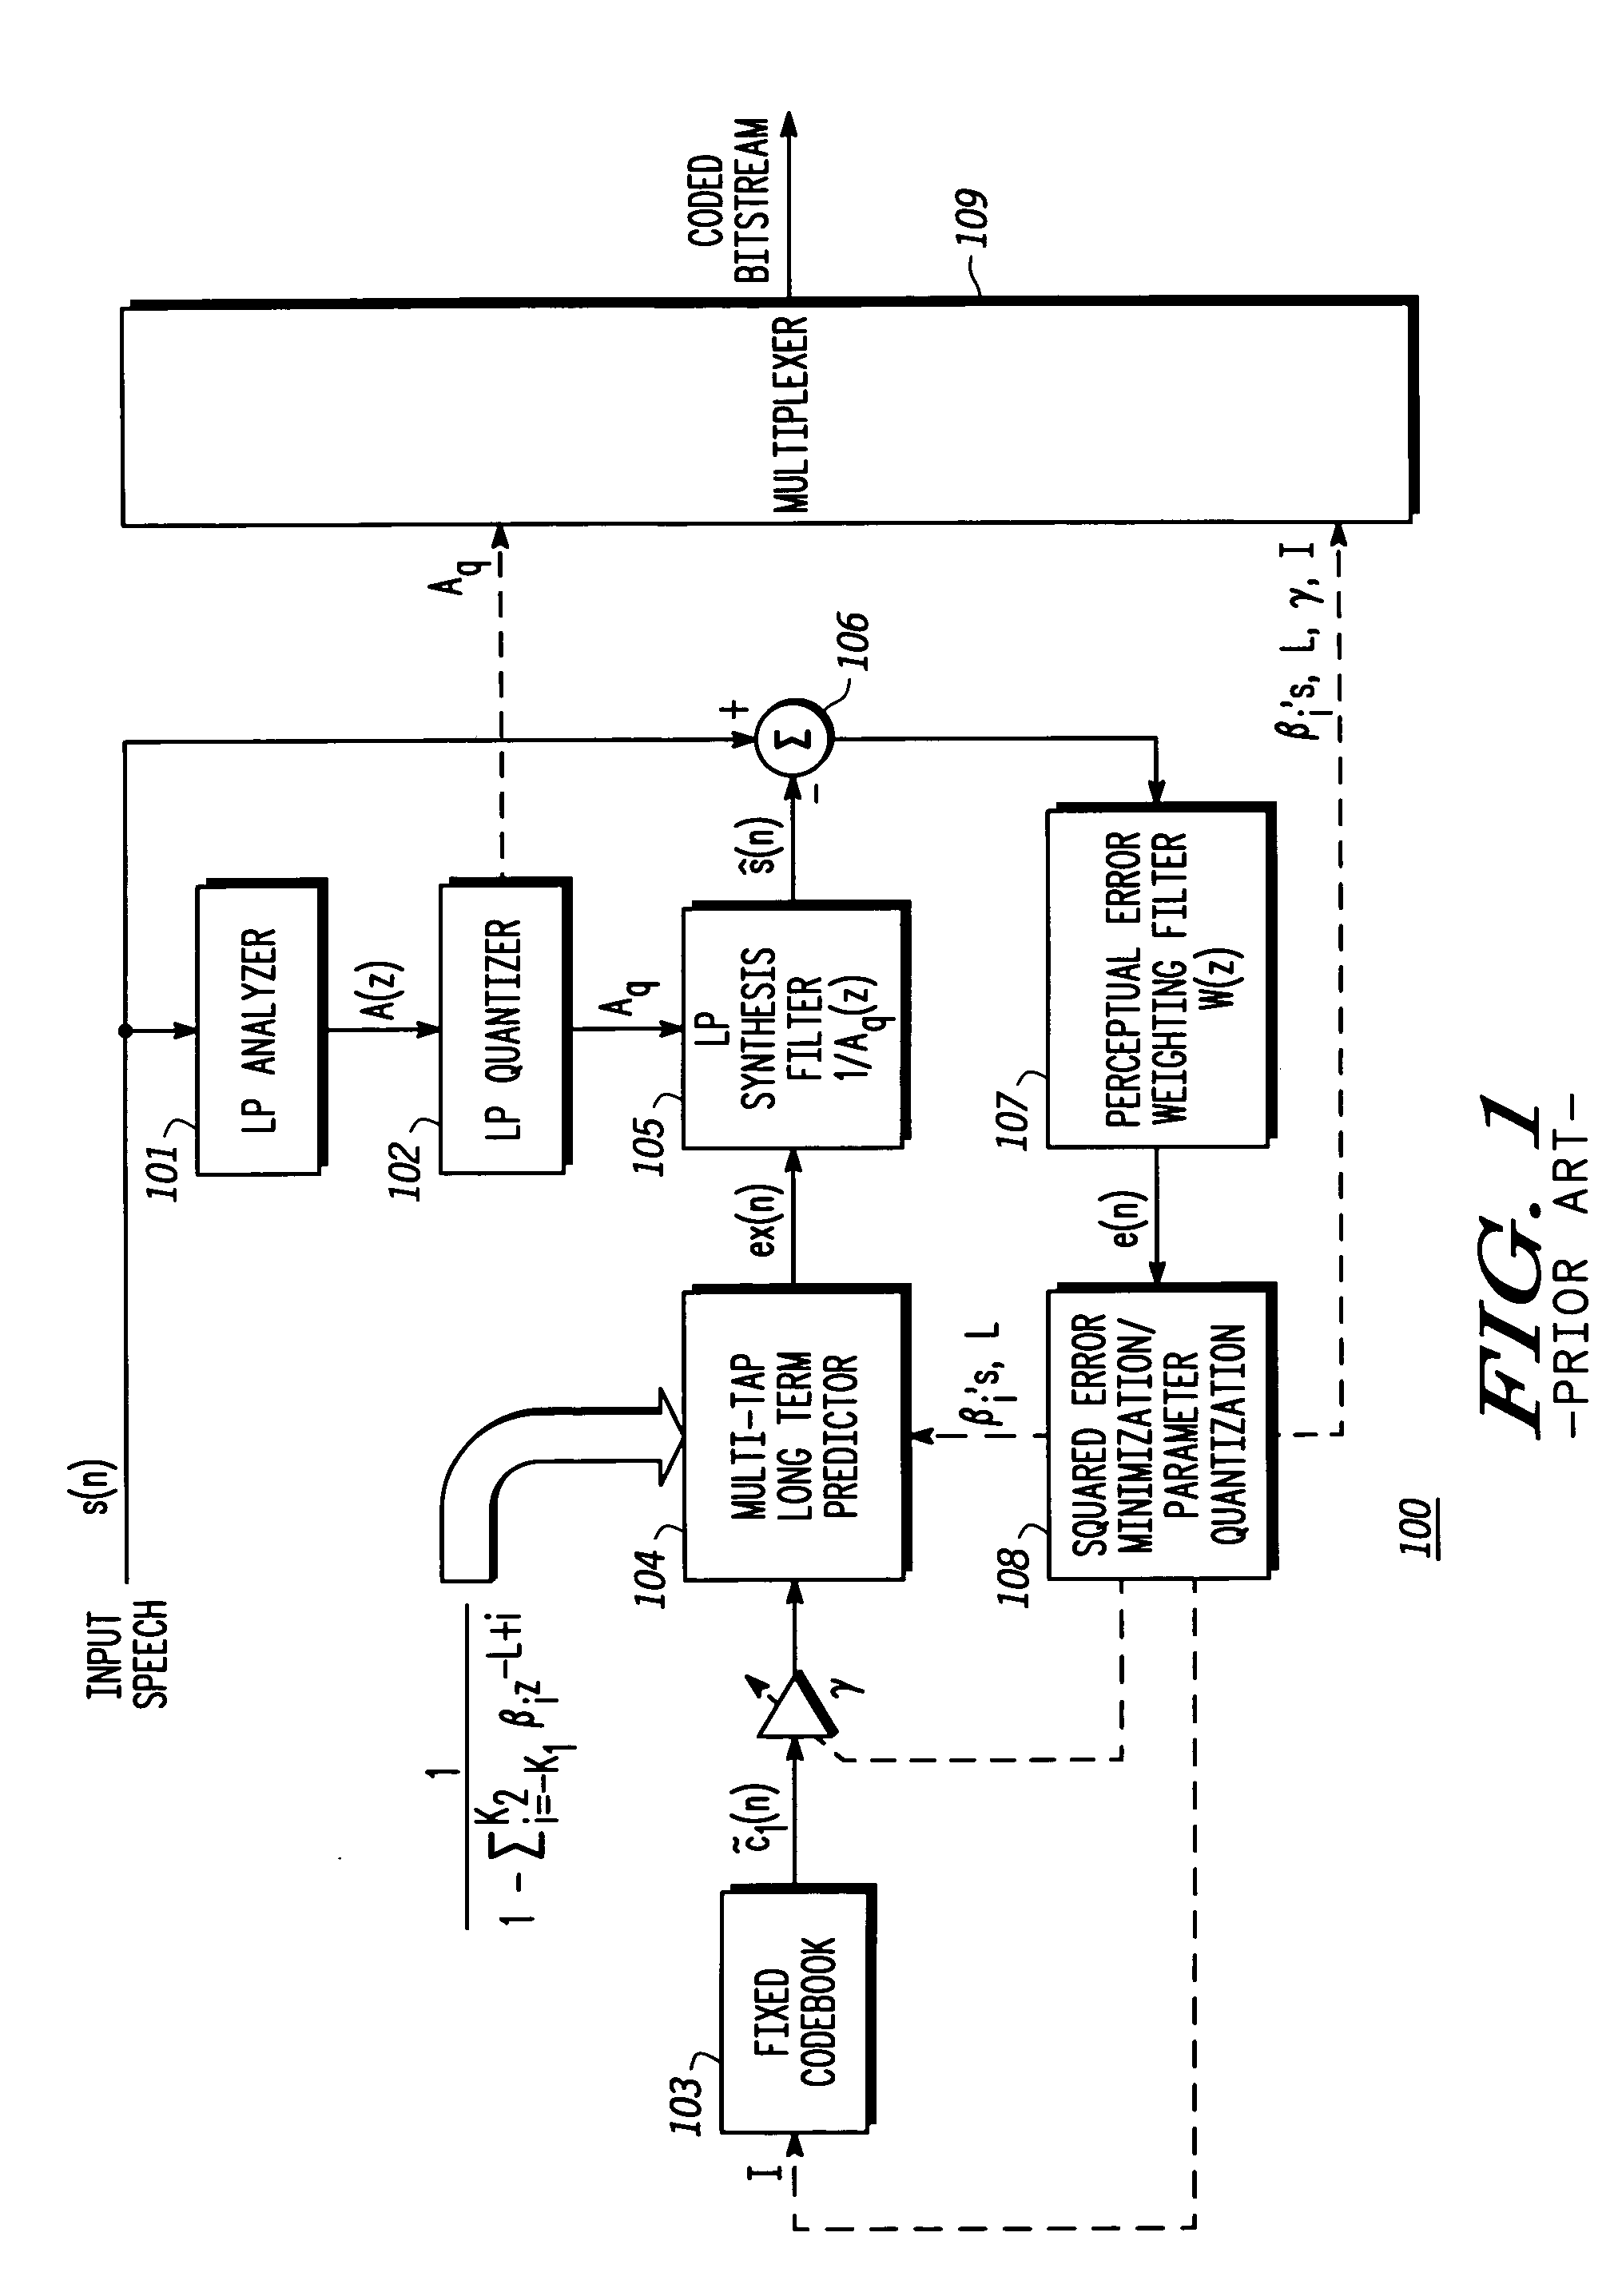 Method and apparatus for speech coding